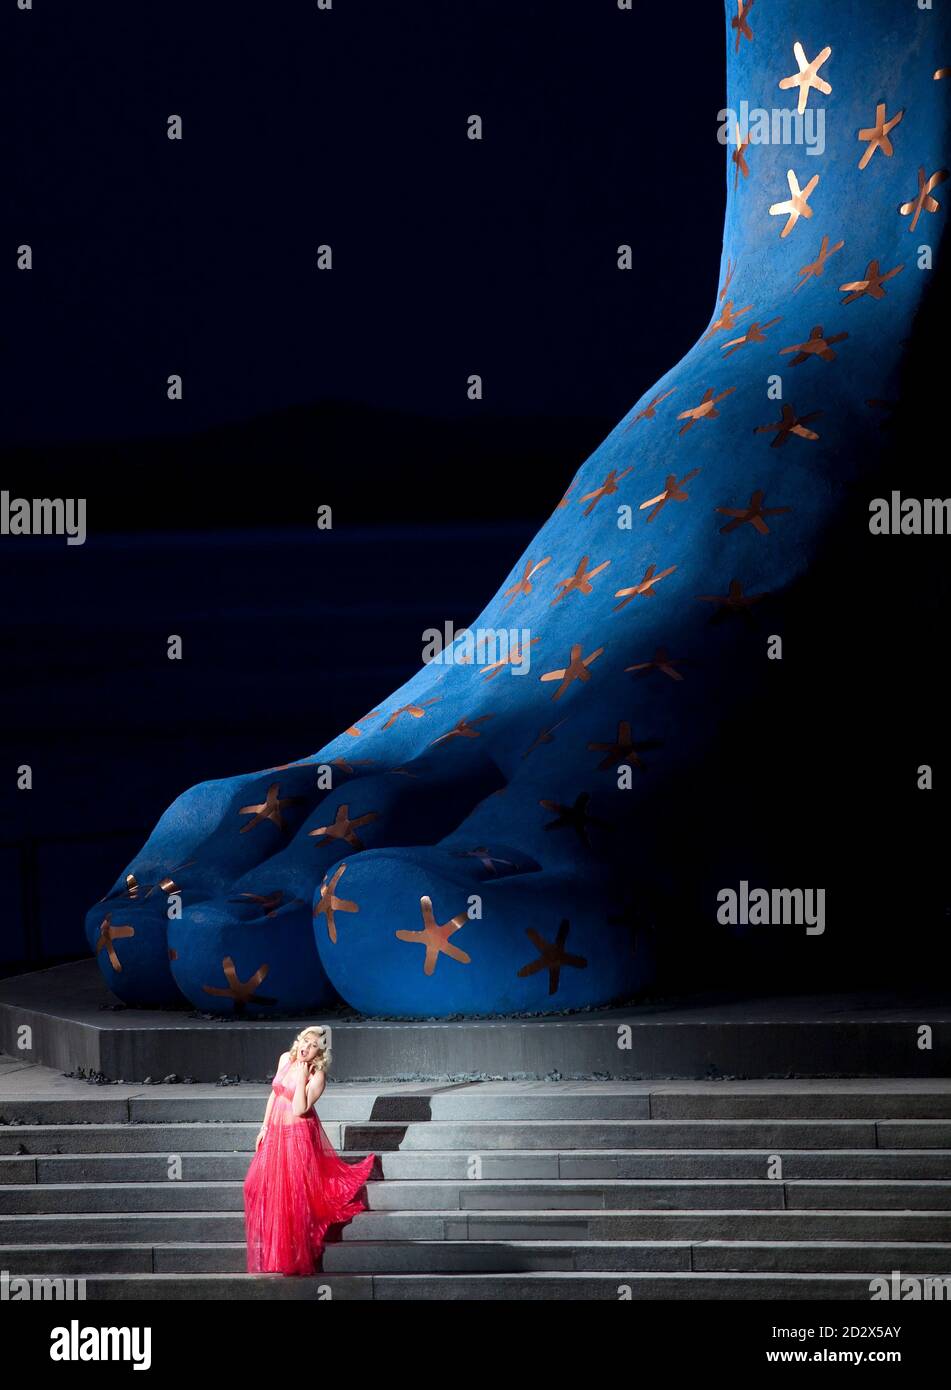 Singer Iano Tamar performs as 'Amneris' on a giant floating stage at Lake Constance during premiere of Giuseppe Verdi's 'Aida' in Bregenz July 22, 2009. The opera is directed by British director Graham Vick and runs until August 23, 2009. REUTERS/Miro Kuzmanovic (AUSTRIA ENTERTAINMENT) Stock Photo